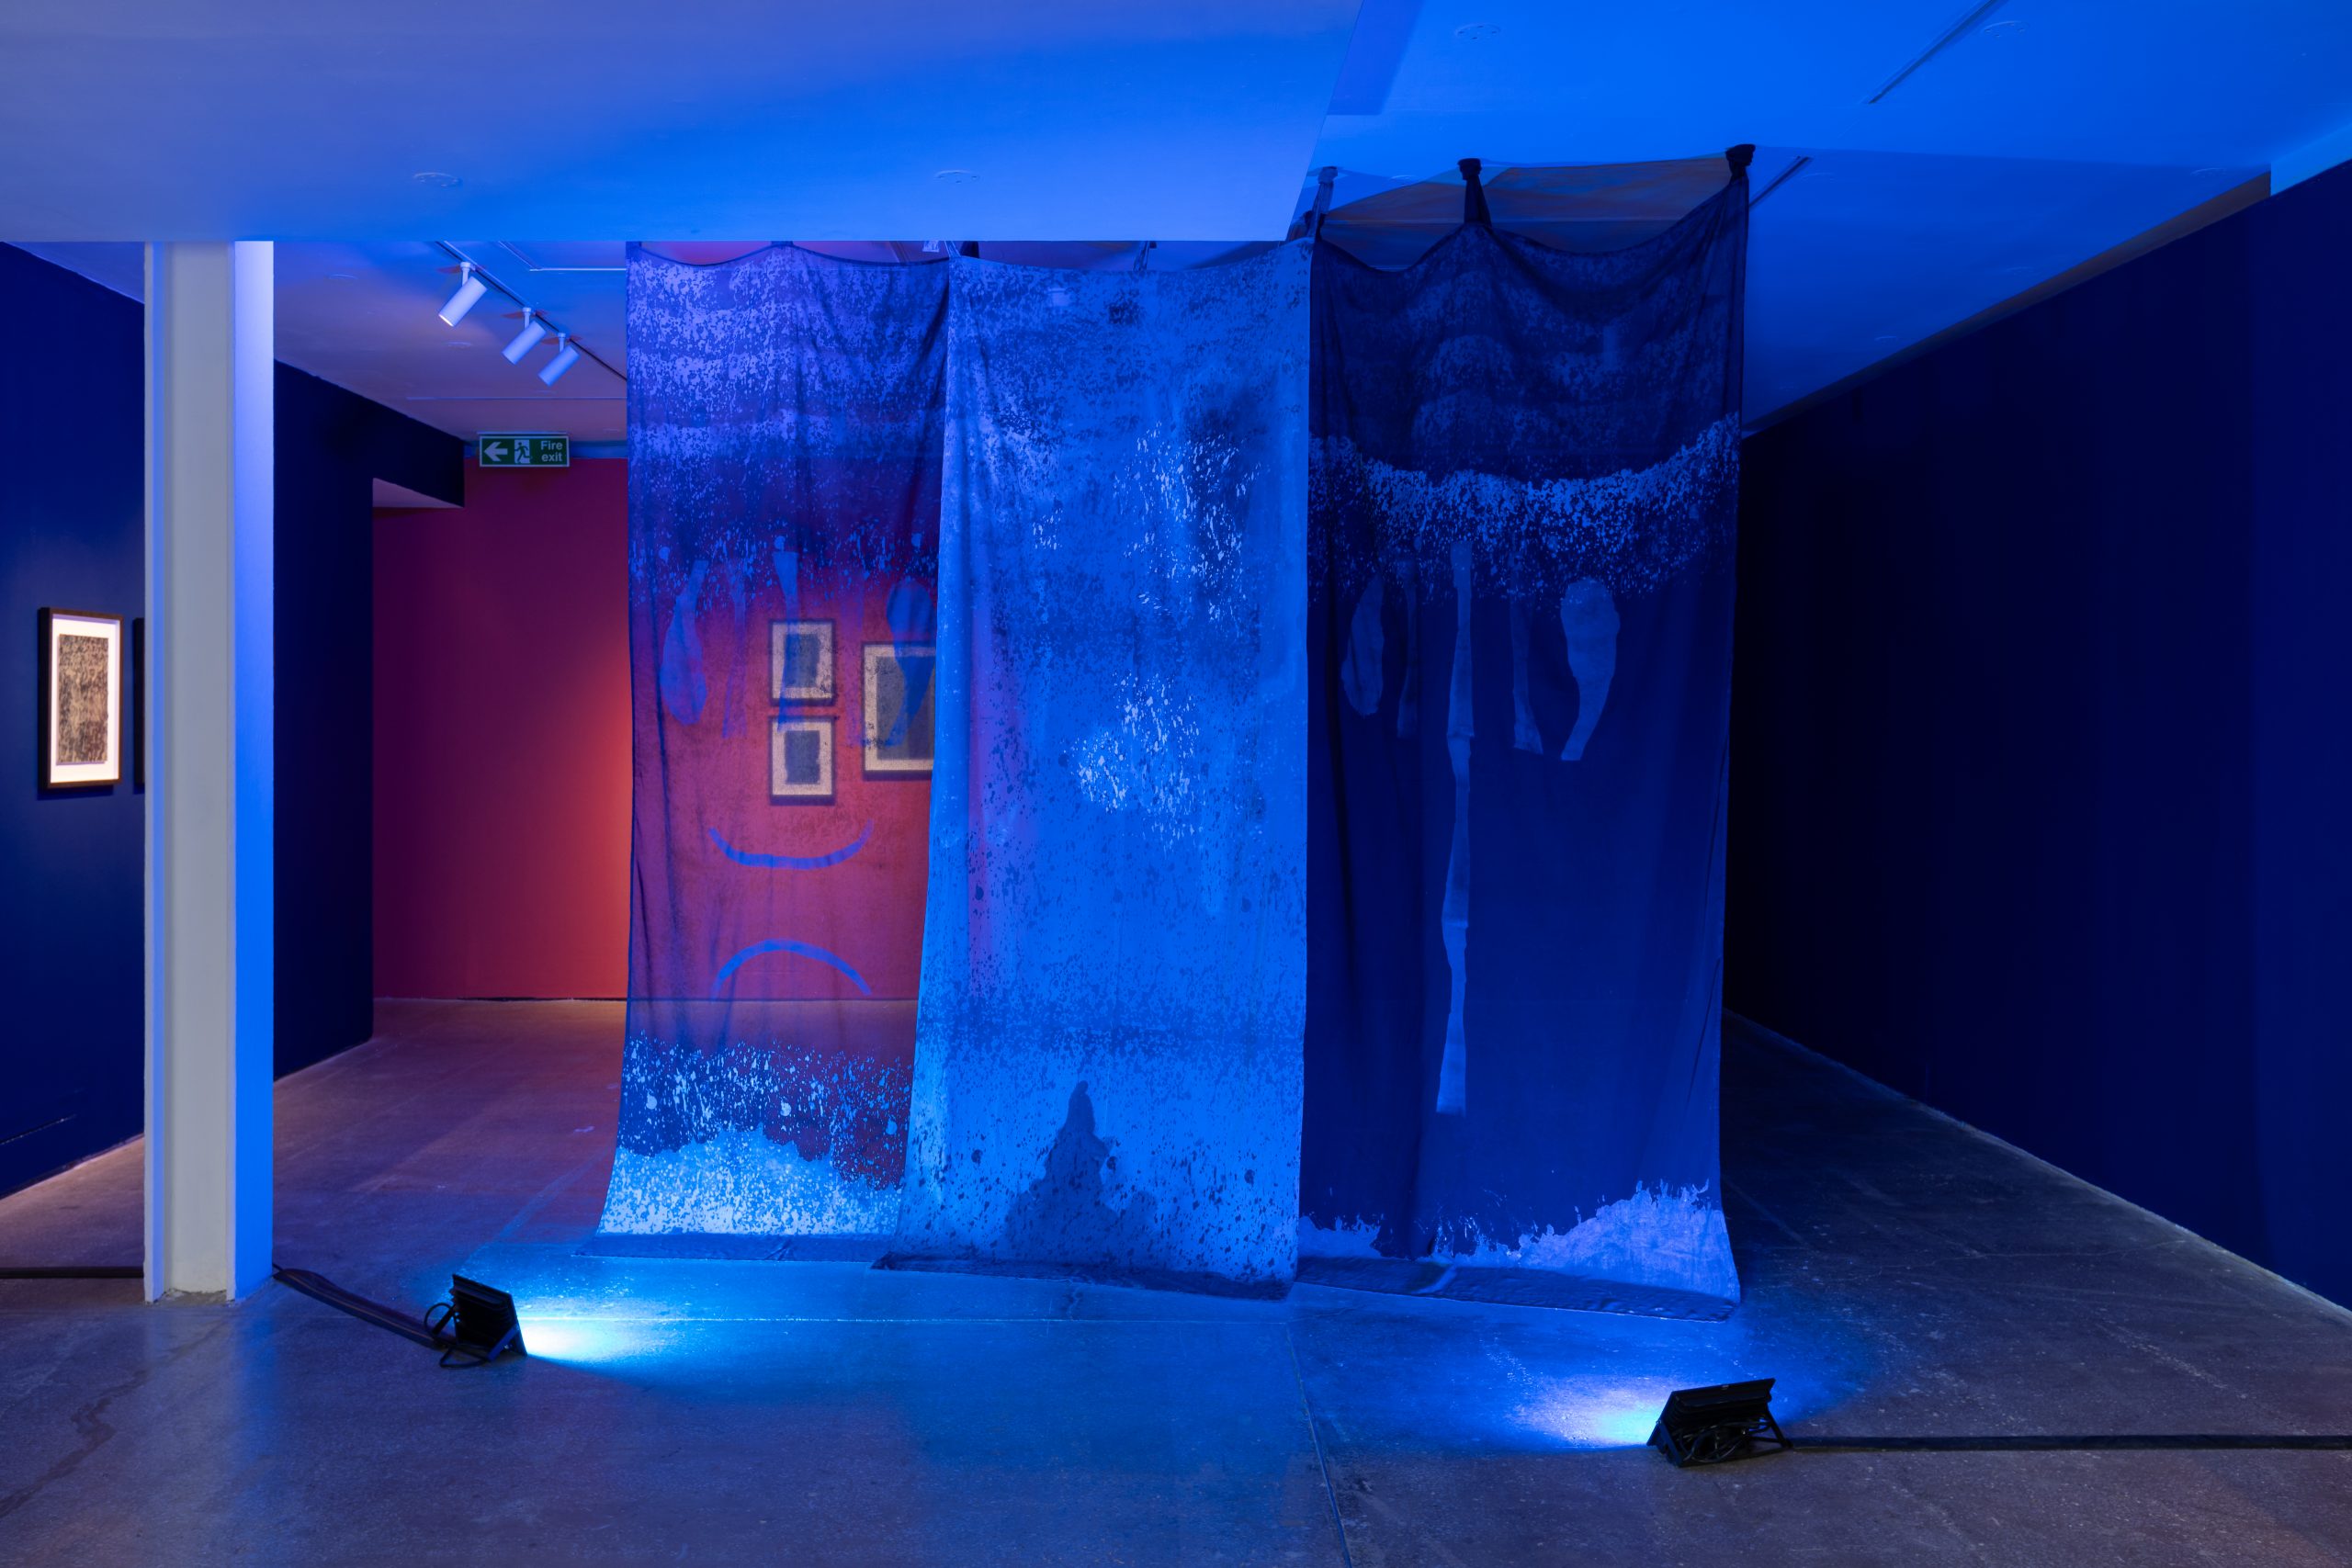 Photograph showing Jesica El Mal's work installed at Castlefield Gallery. Three transulsent blue banners, lit by two blue lights, hang floor to celing infront of a red wall.